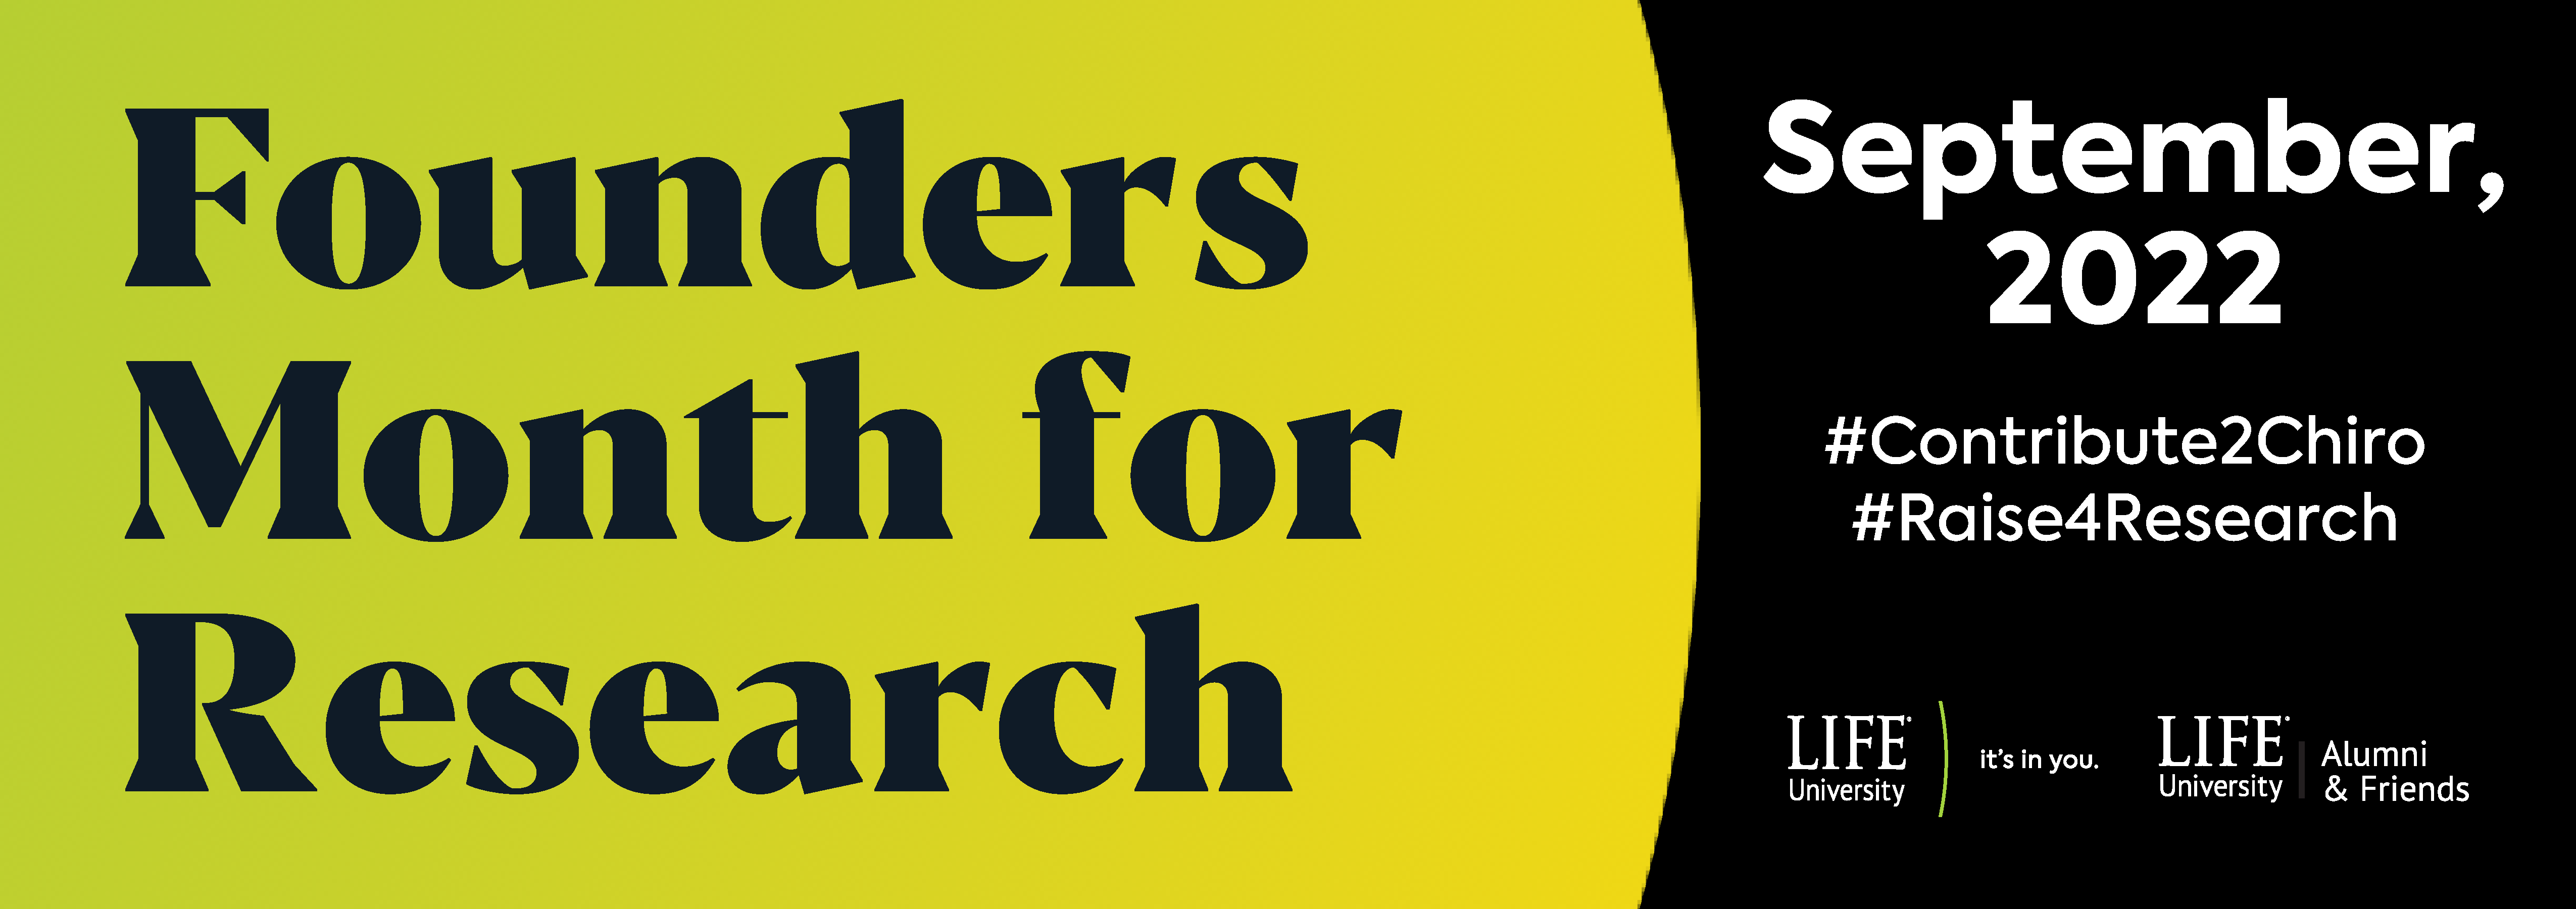 Founders Month for Research 2022